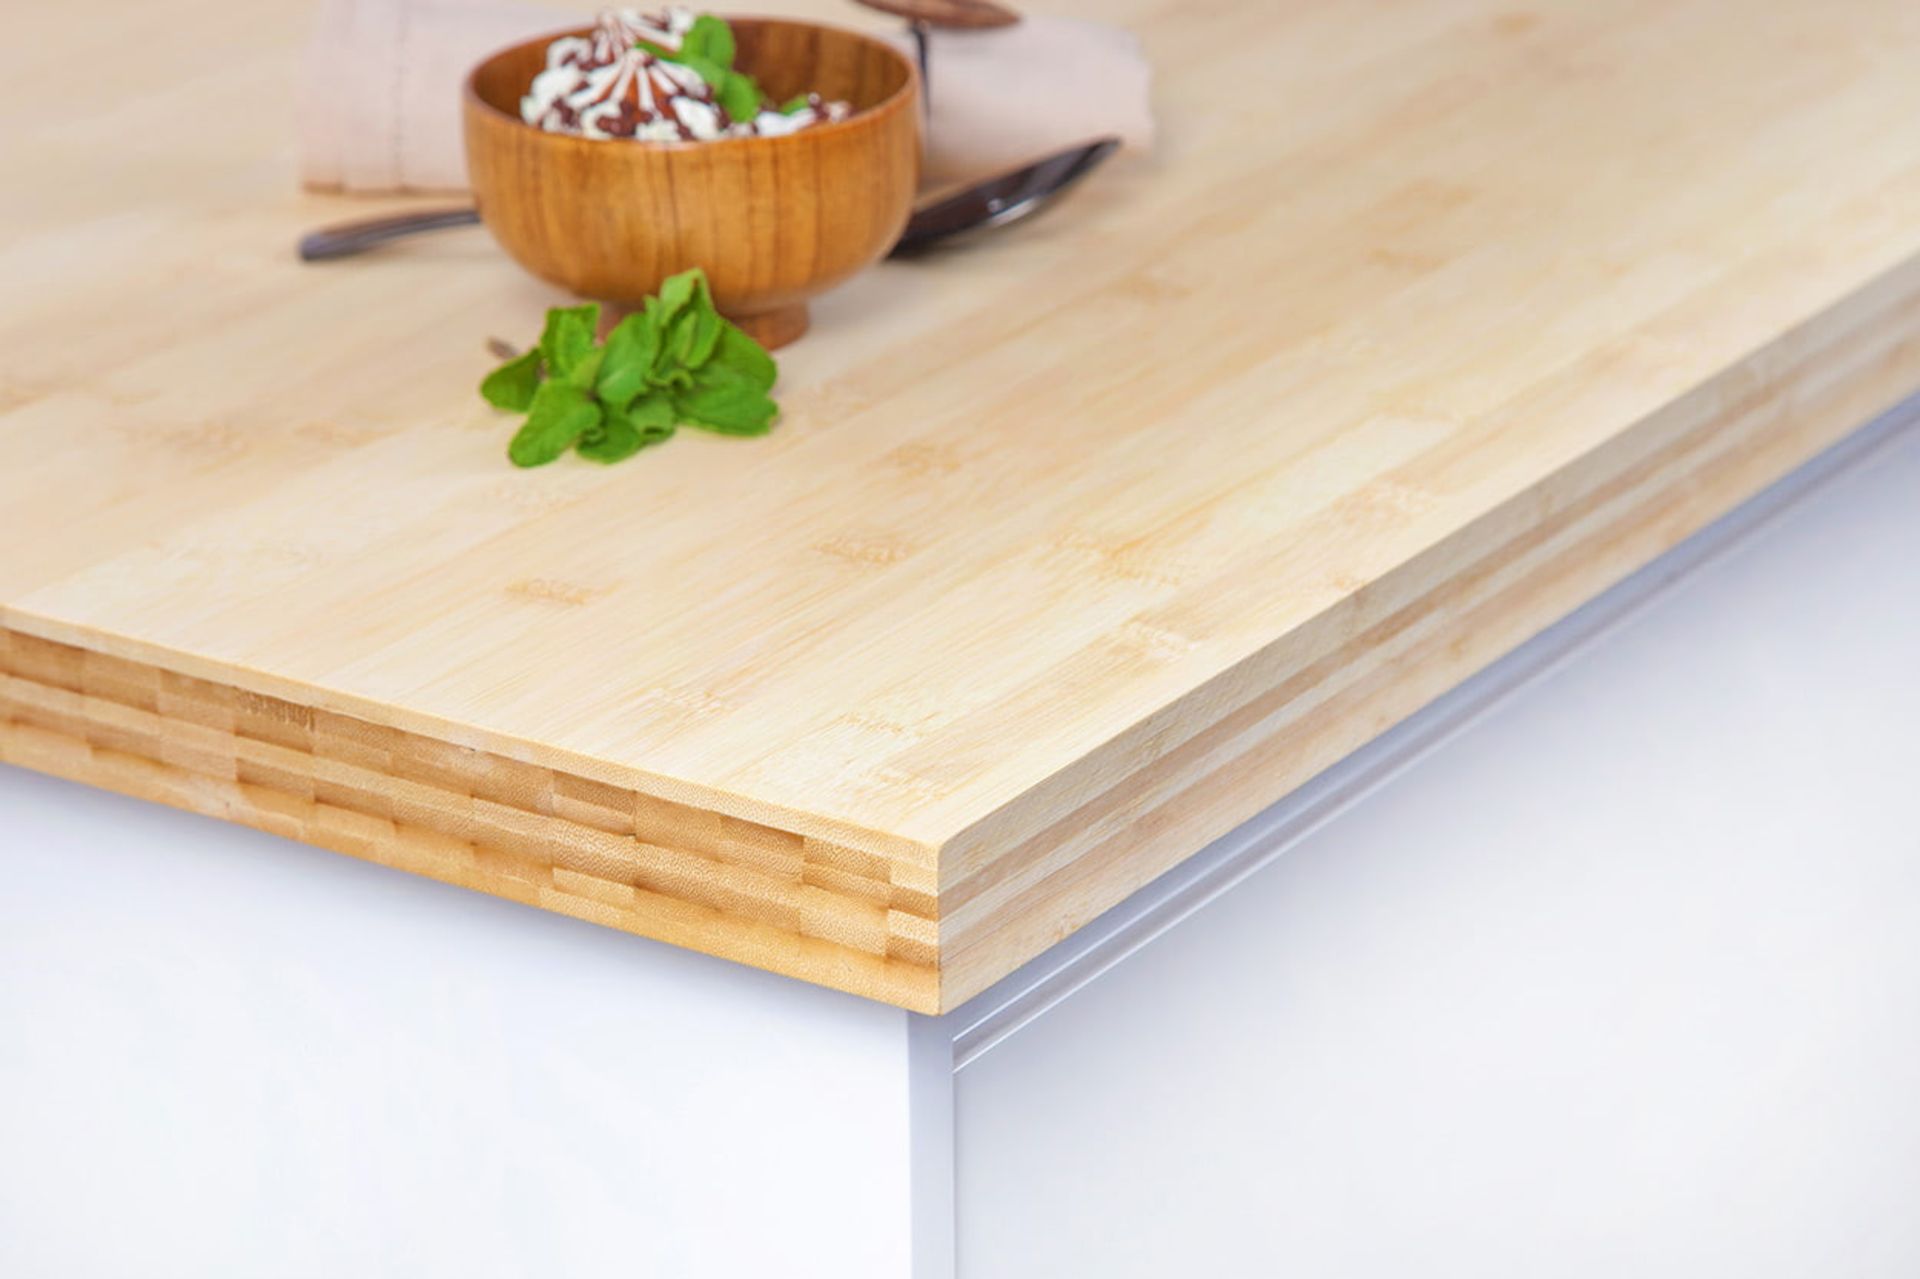 1 x Layered Solid Bamboo Wood Kitchen Worktop - Size: 3000 x 900 x 40mm - Ideal For Kitchens,